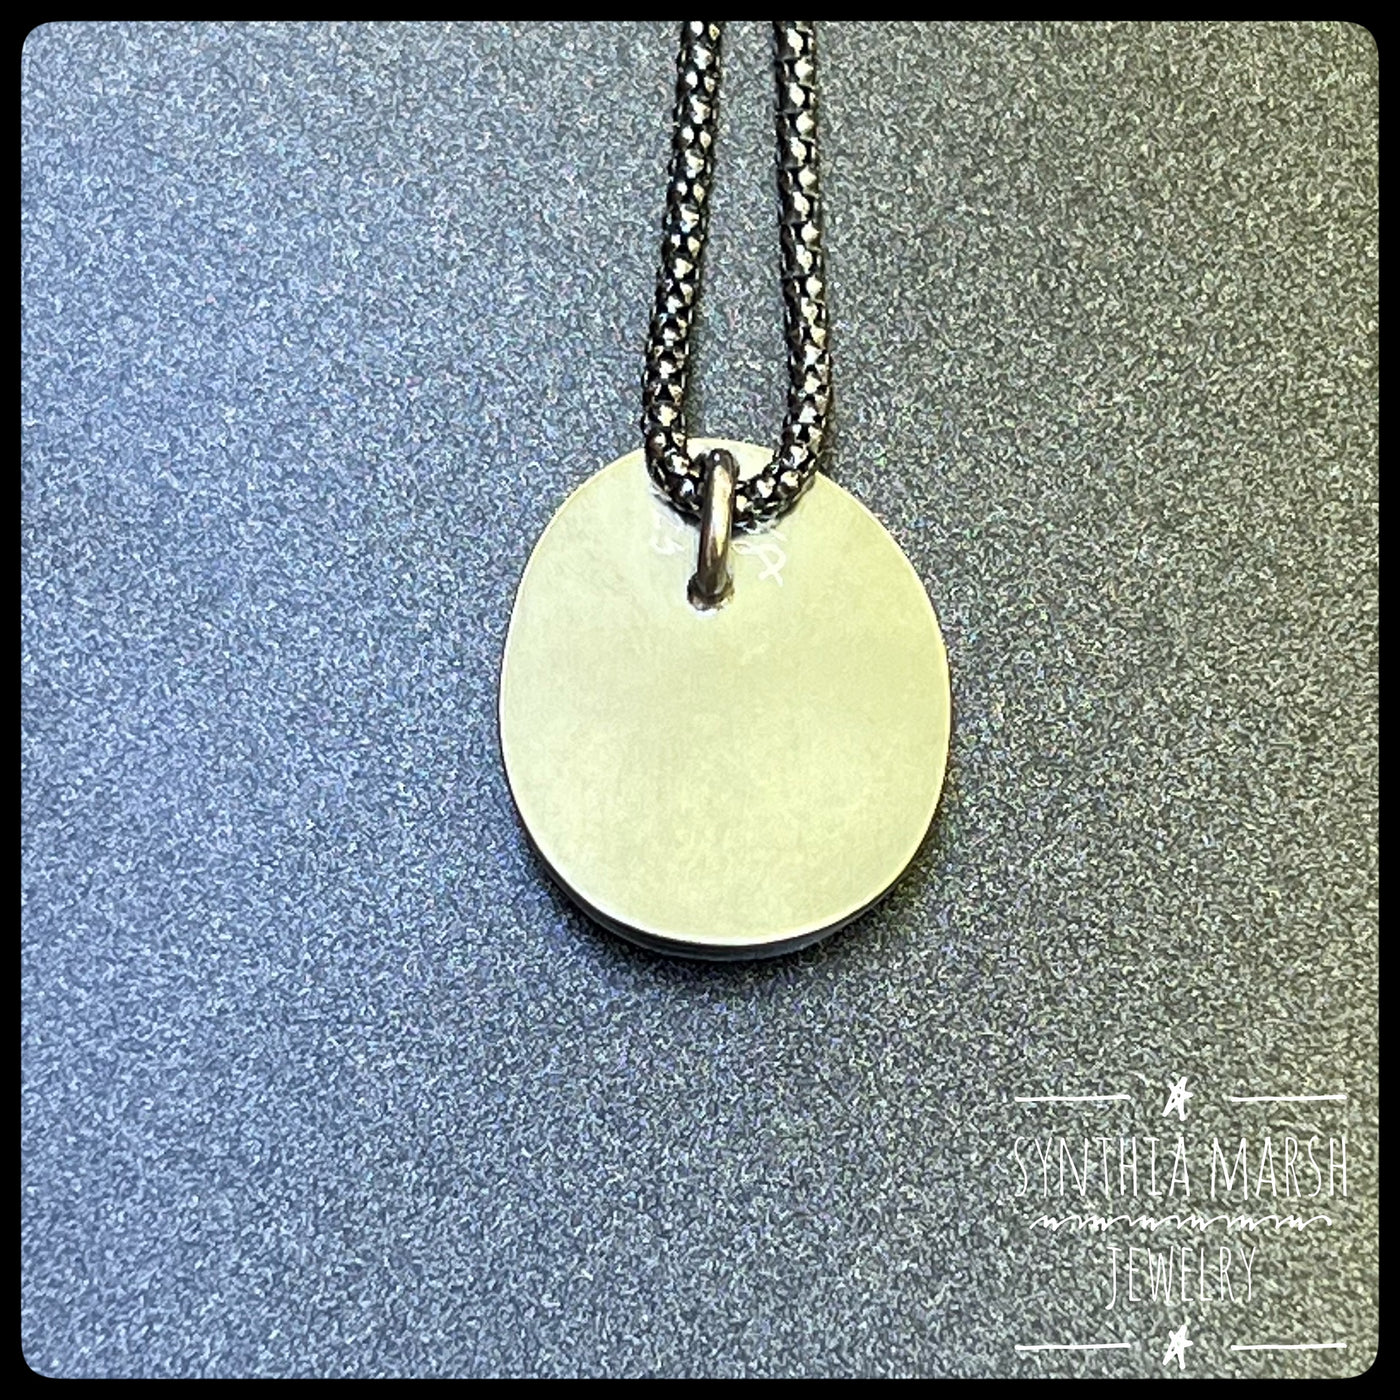 UP Jacobsville Sandstone Sterling Pendant Necklace ~ Made in the Keweenaw Peninsula